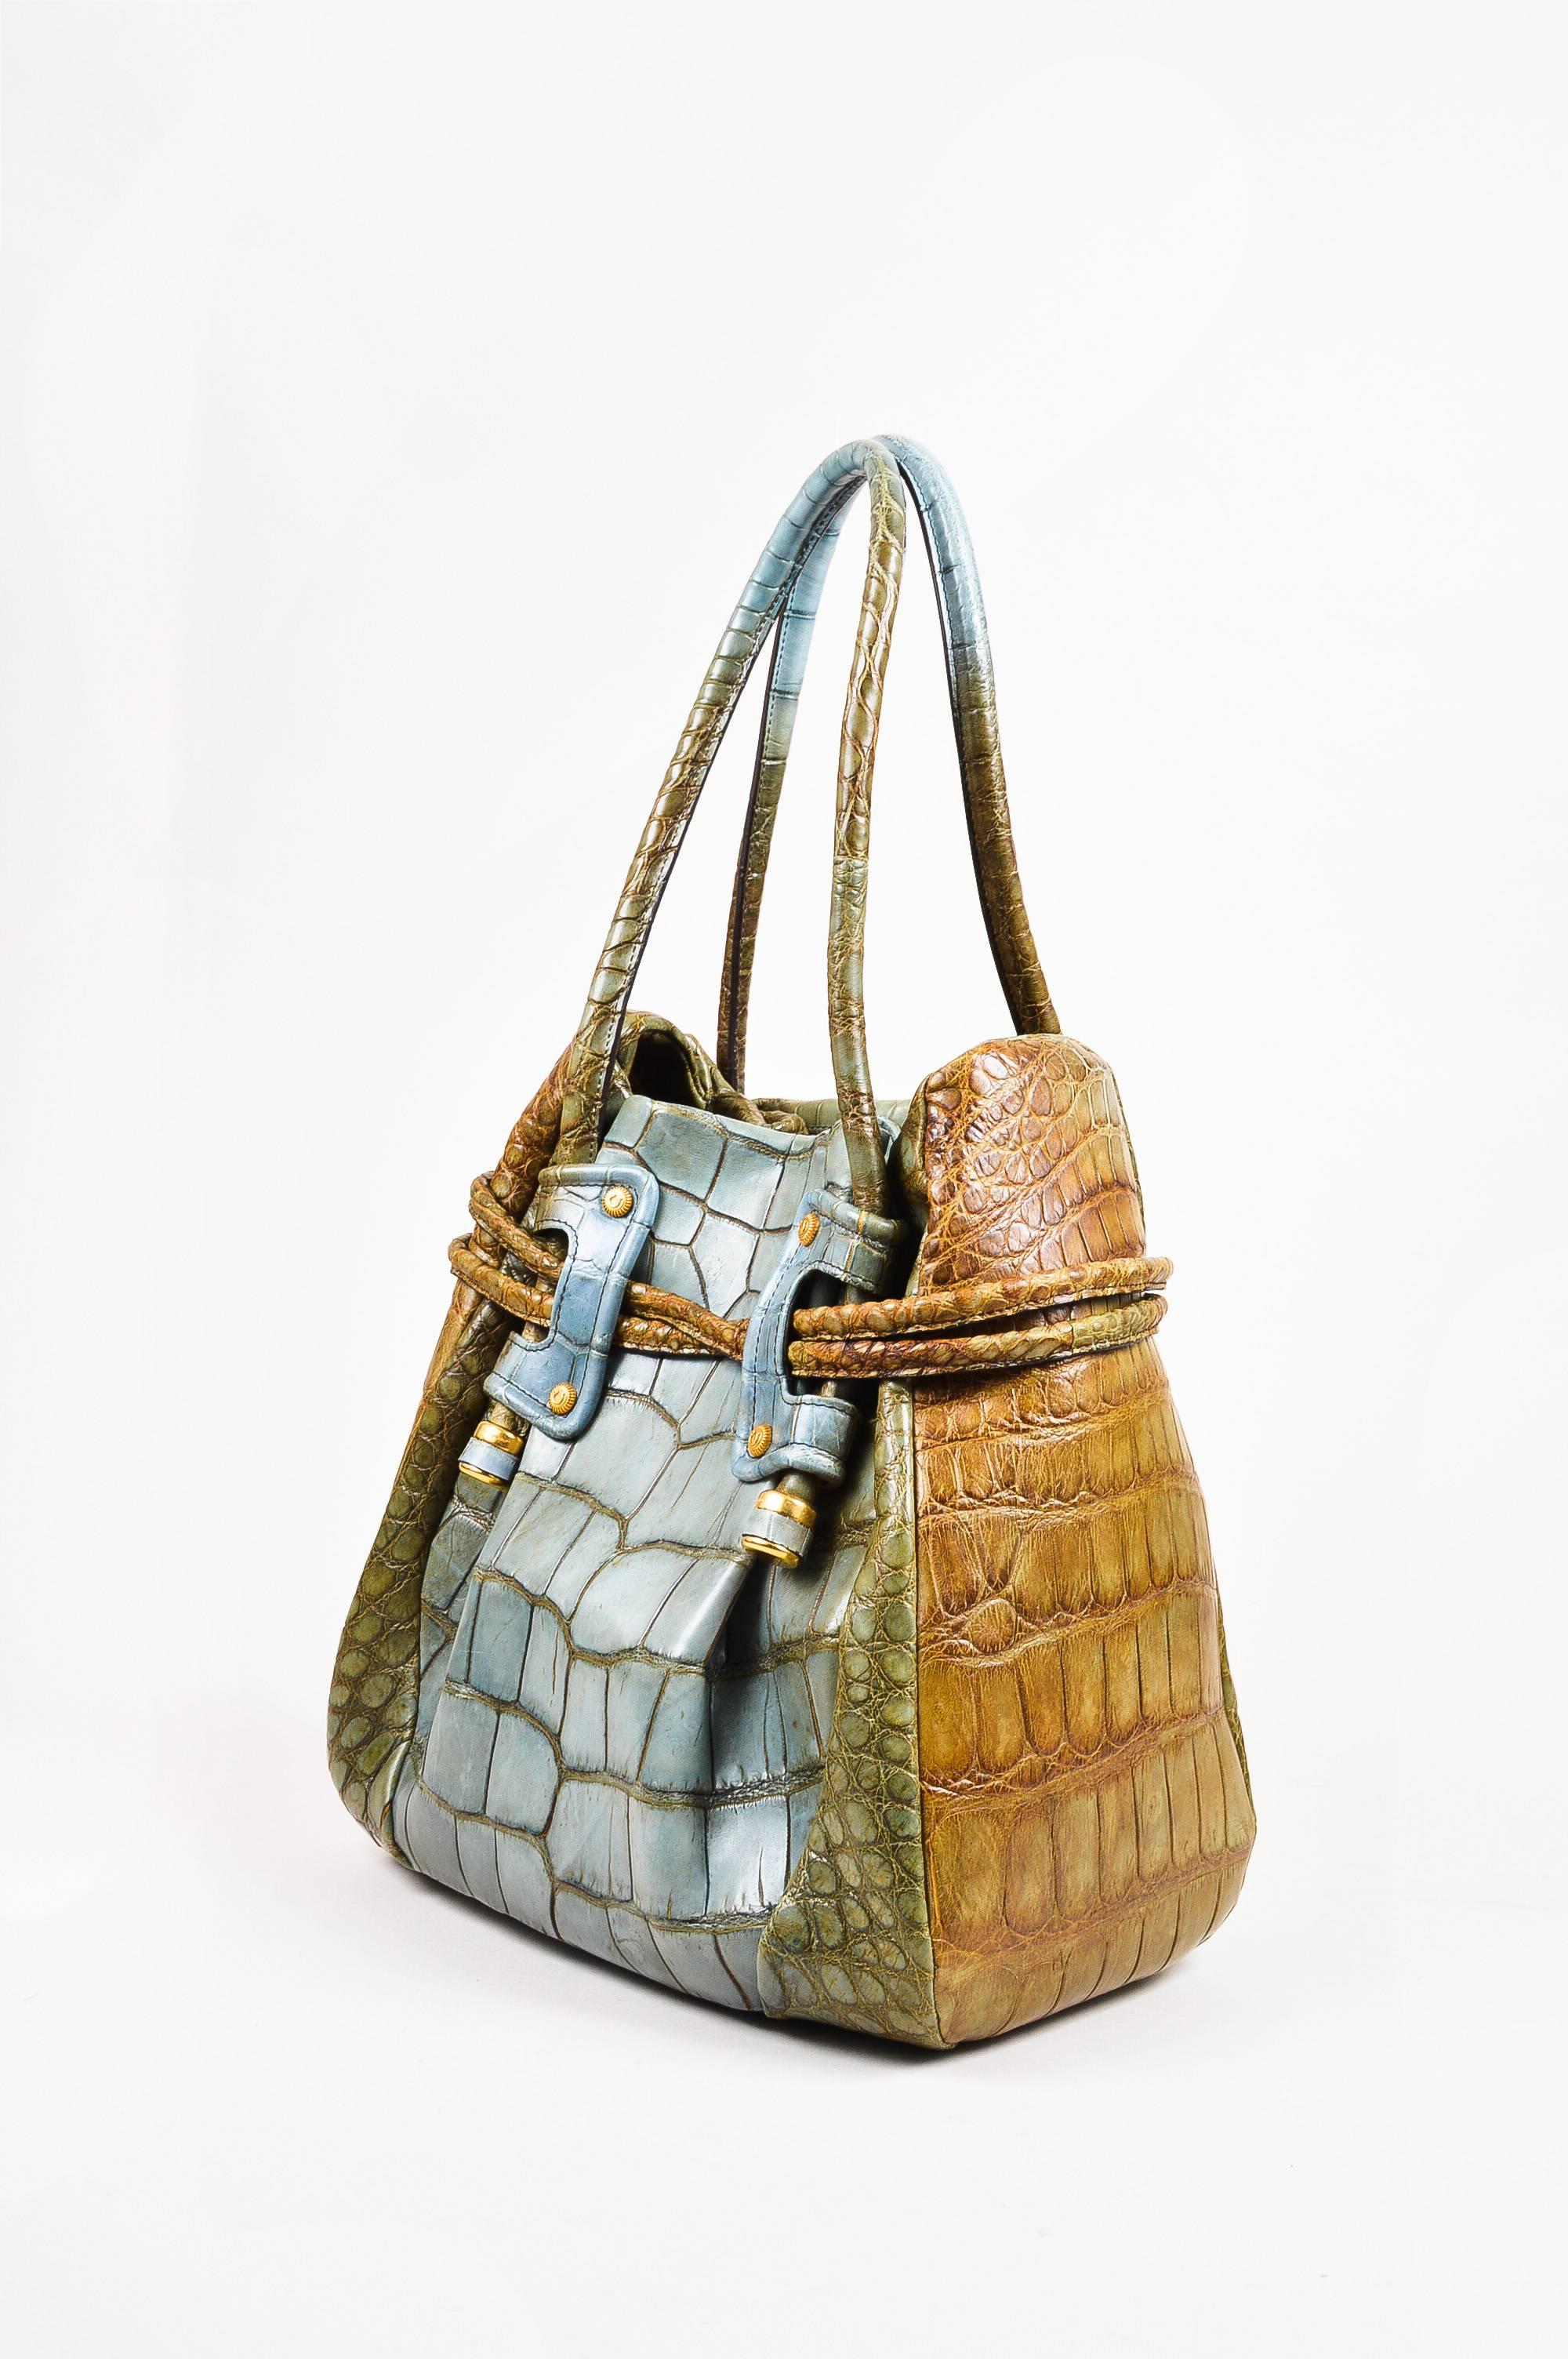 Made In: Italy

Fabric Content: Genuine Alligator Leather; Lining: Suede

Item Specifics & Details: Comes with box, dust bag, brand tags, and care booklet. Retails at $18,000. Olive green and light teal genuine alligator leather bucket bag